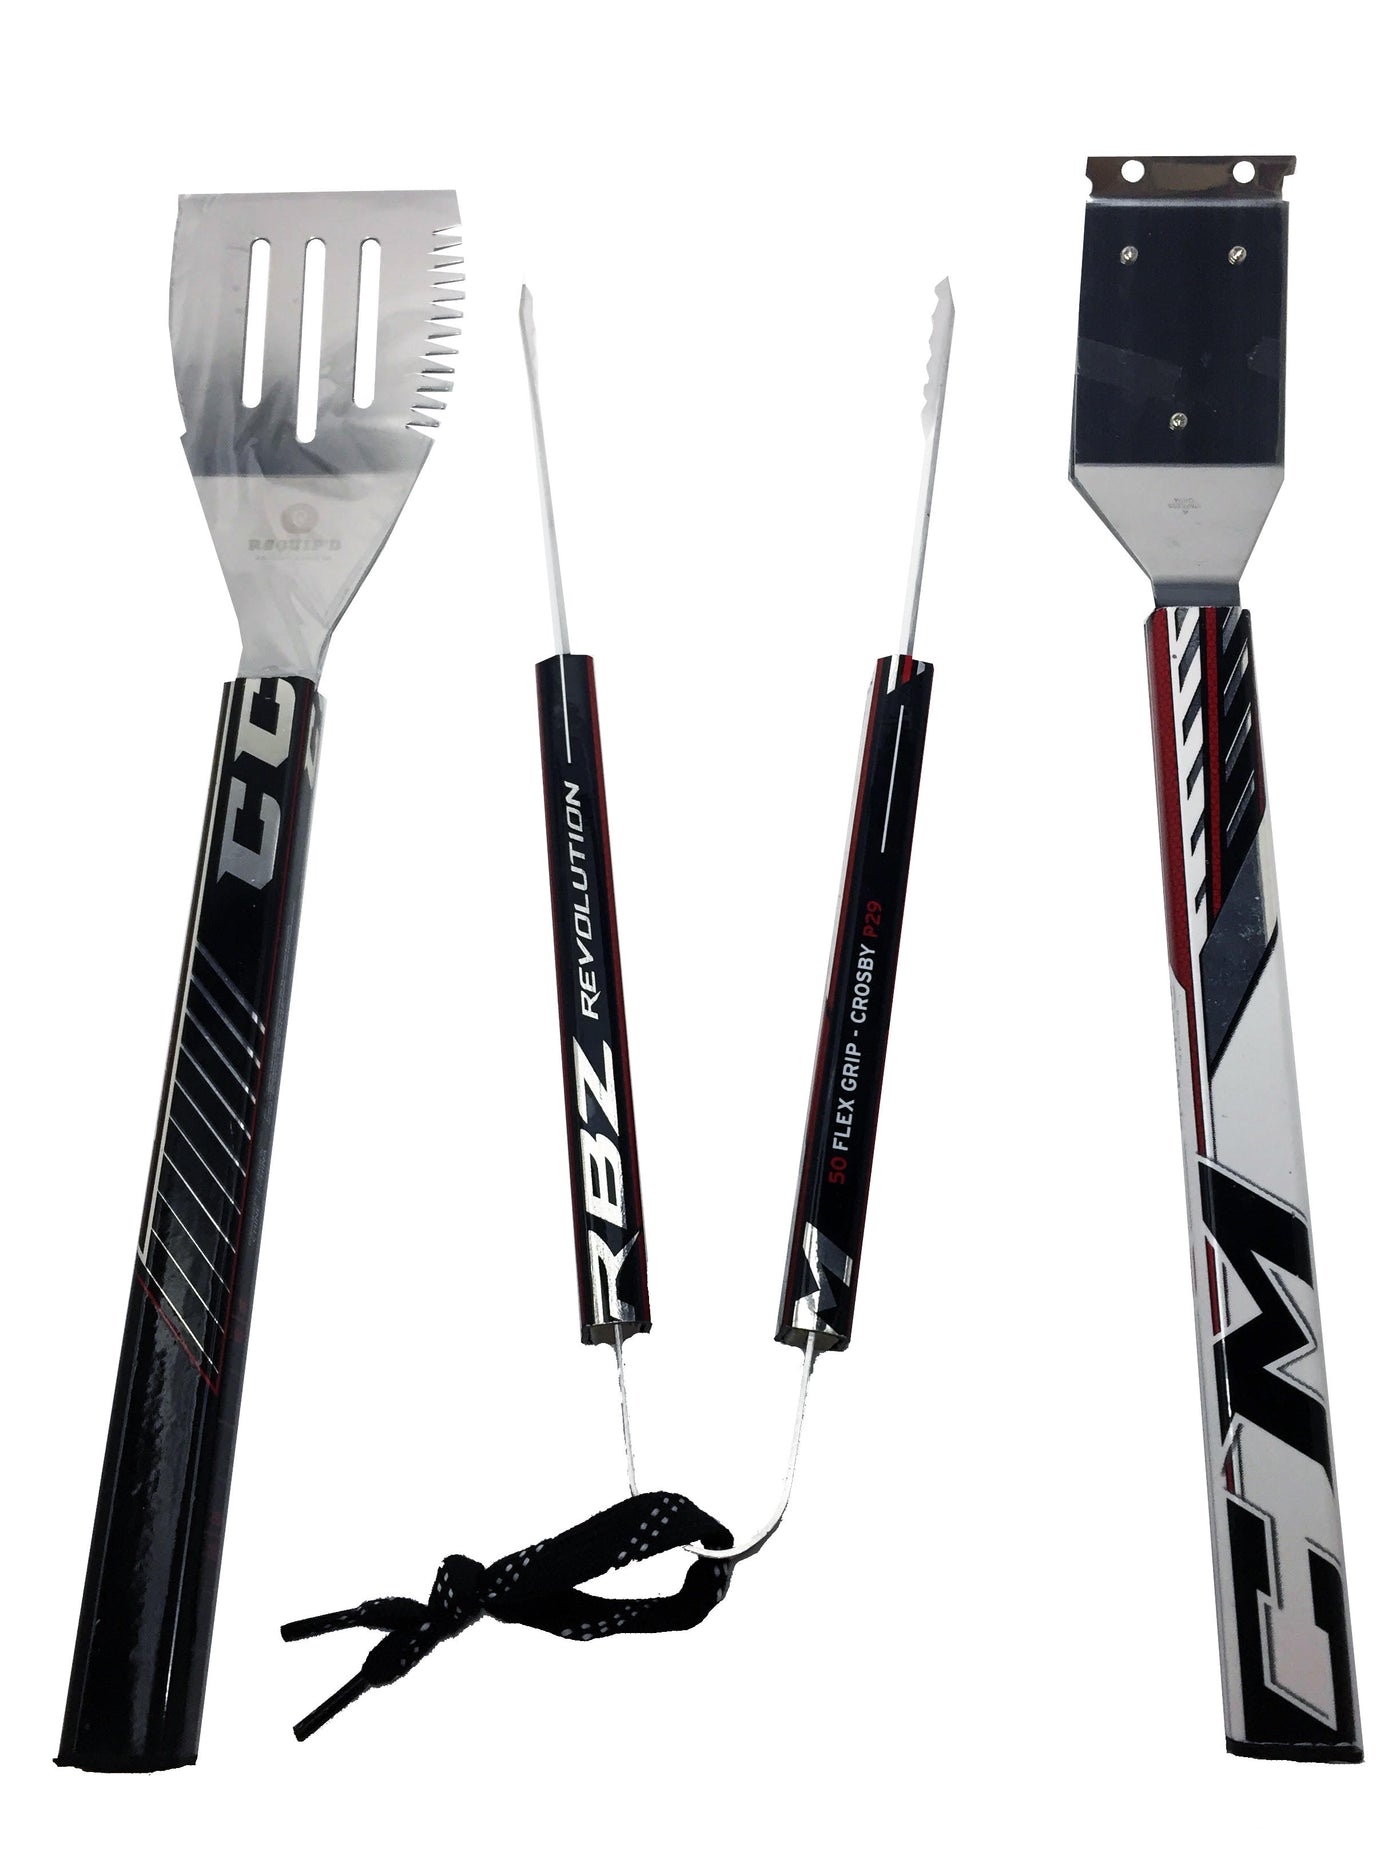 3 piece BBQ Set  BBQ Set - Requip'd formerly Hat Trick BBQ - Made from hockey sticks and hockey gear - perfect gifts for hockey fans